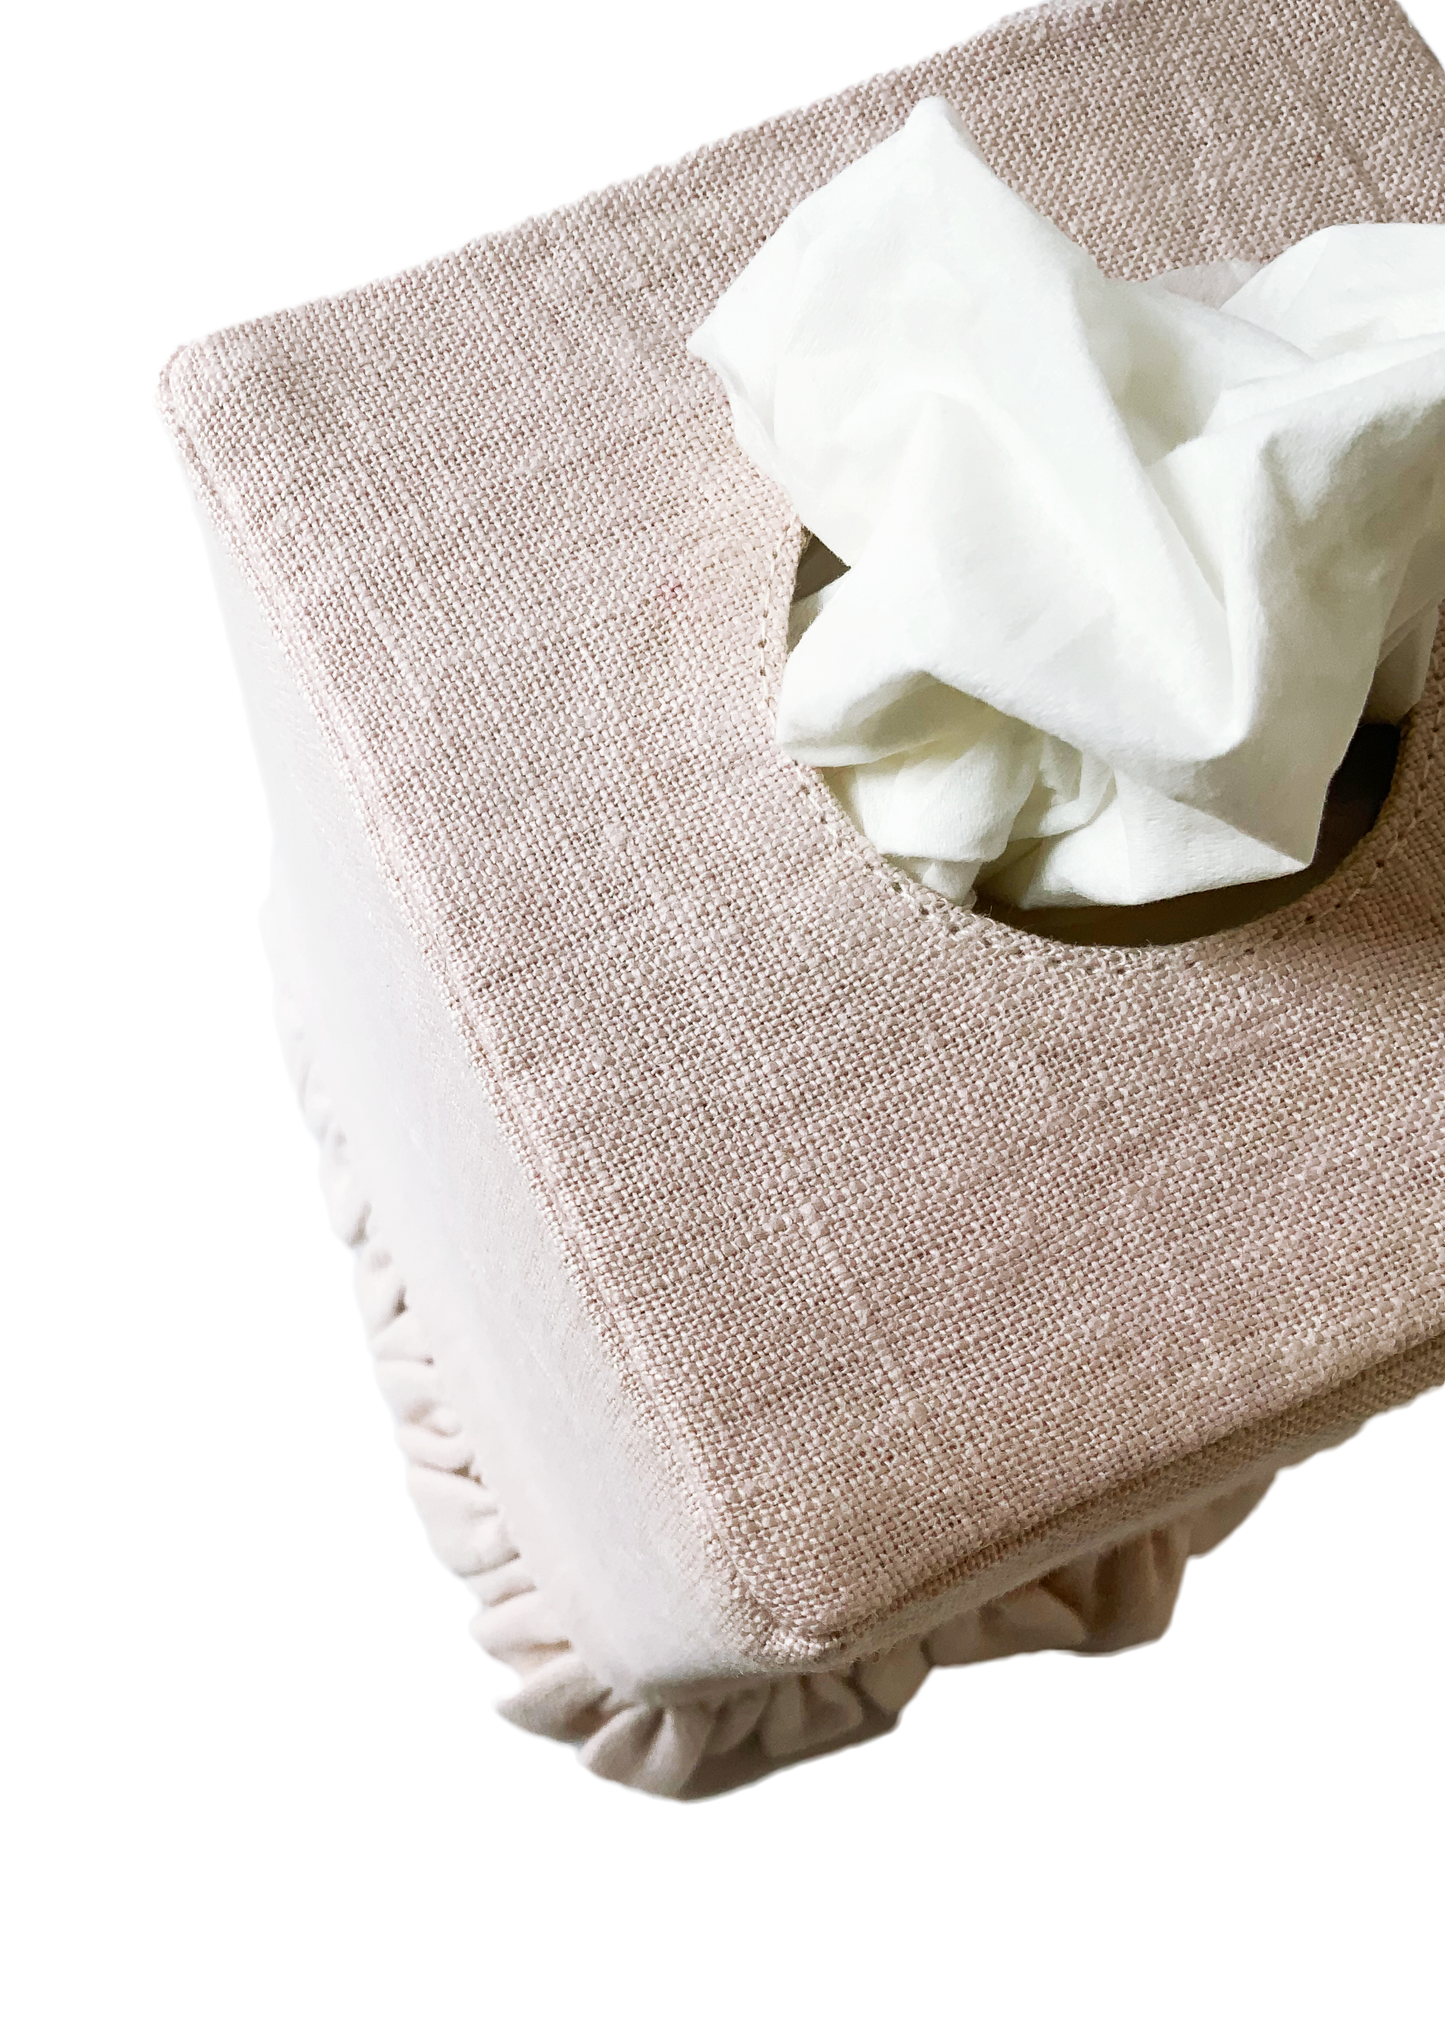 Soft Pink Pastel Tissue Box Cover with Ruffles